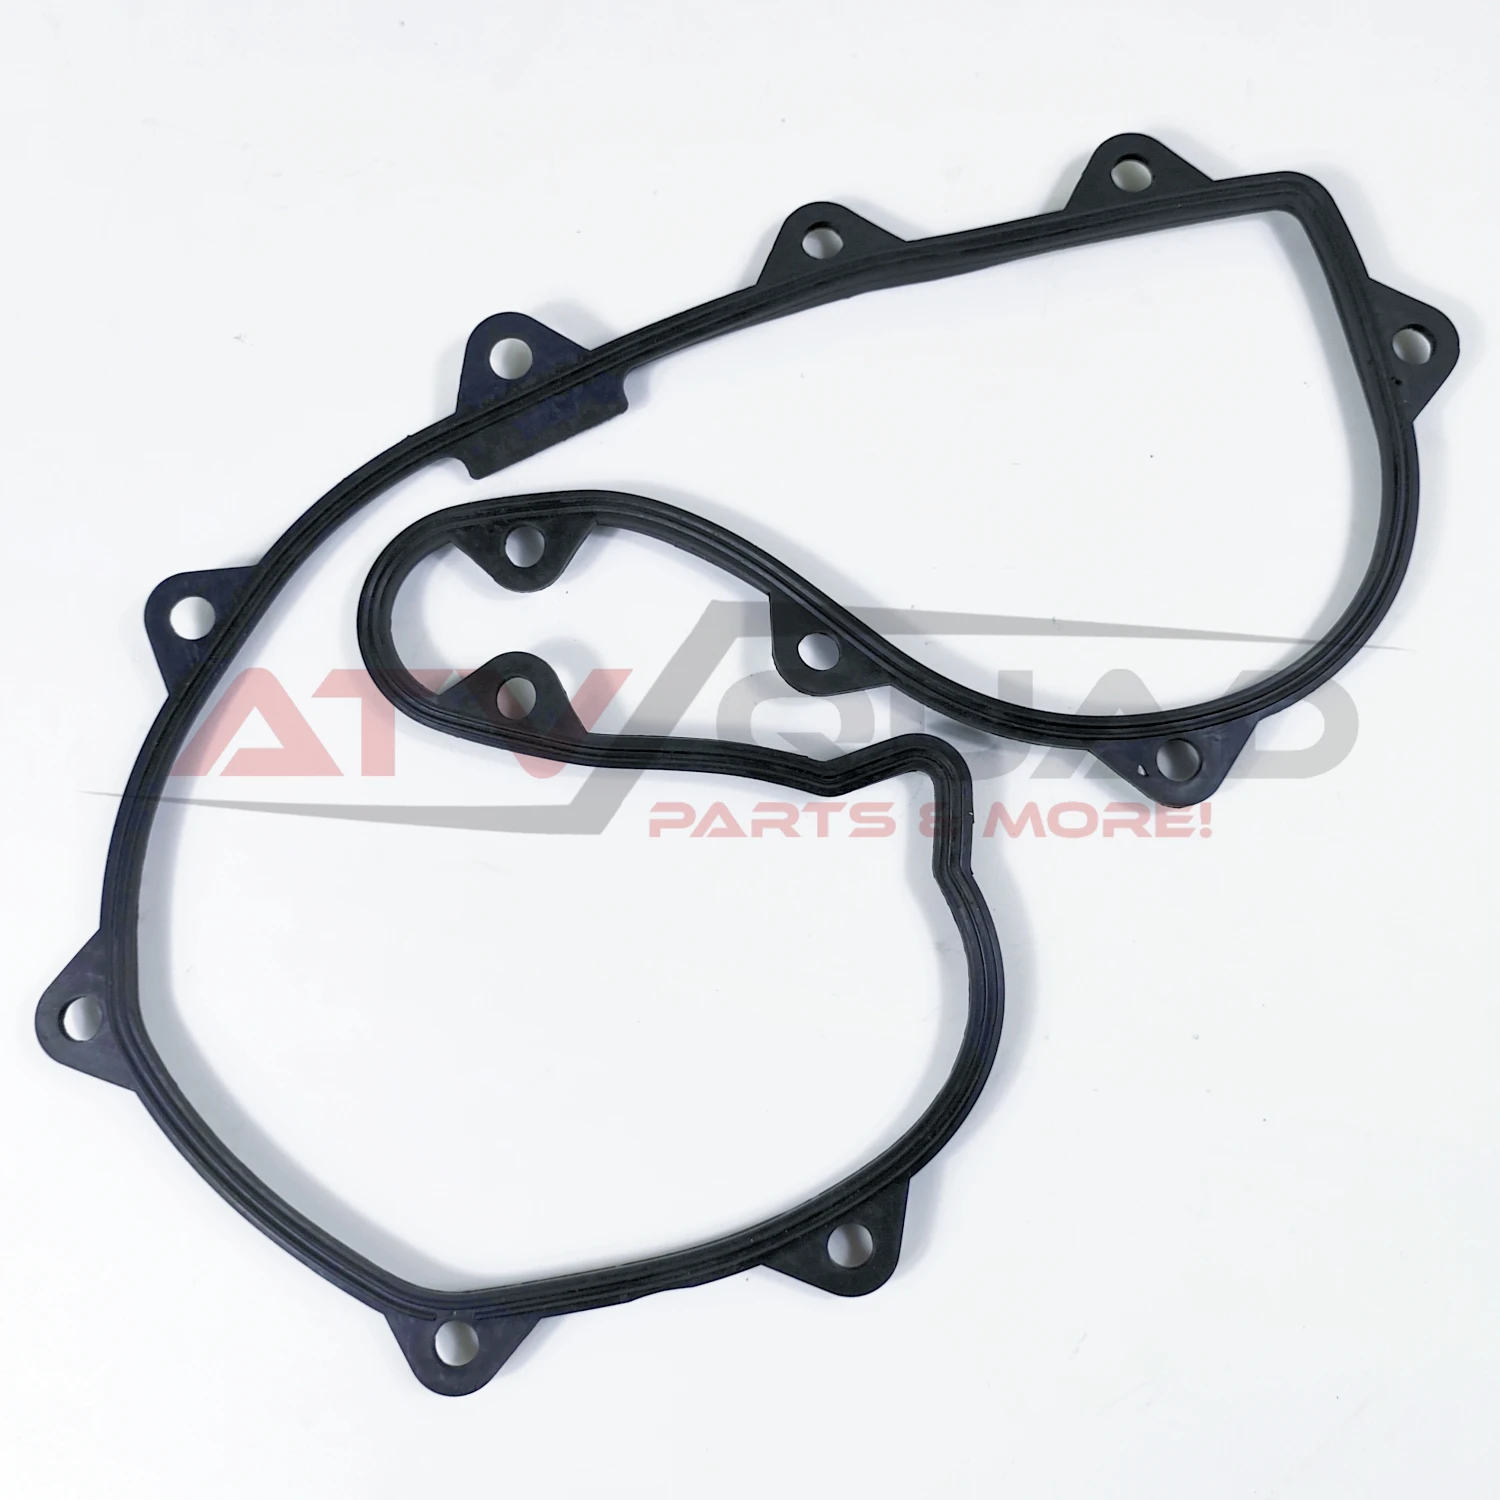 Clutch Cover Gasket for Can-Am Outlander 570 650 850 1000 1000R Renegade 650 1000 1000R 420430126 420430127